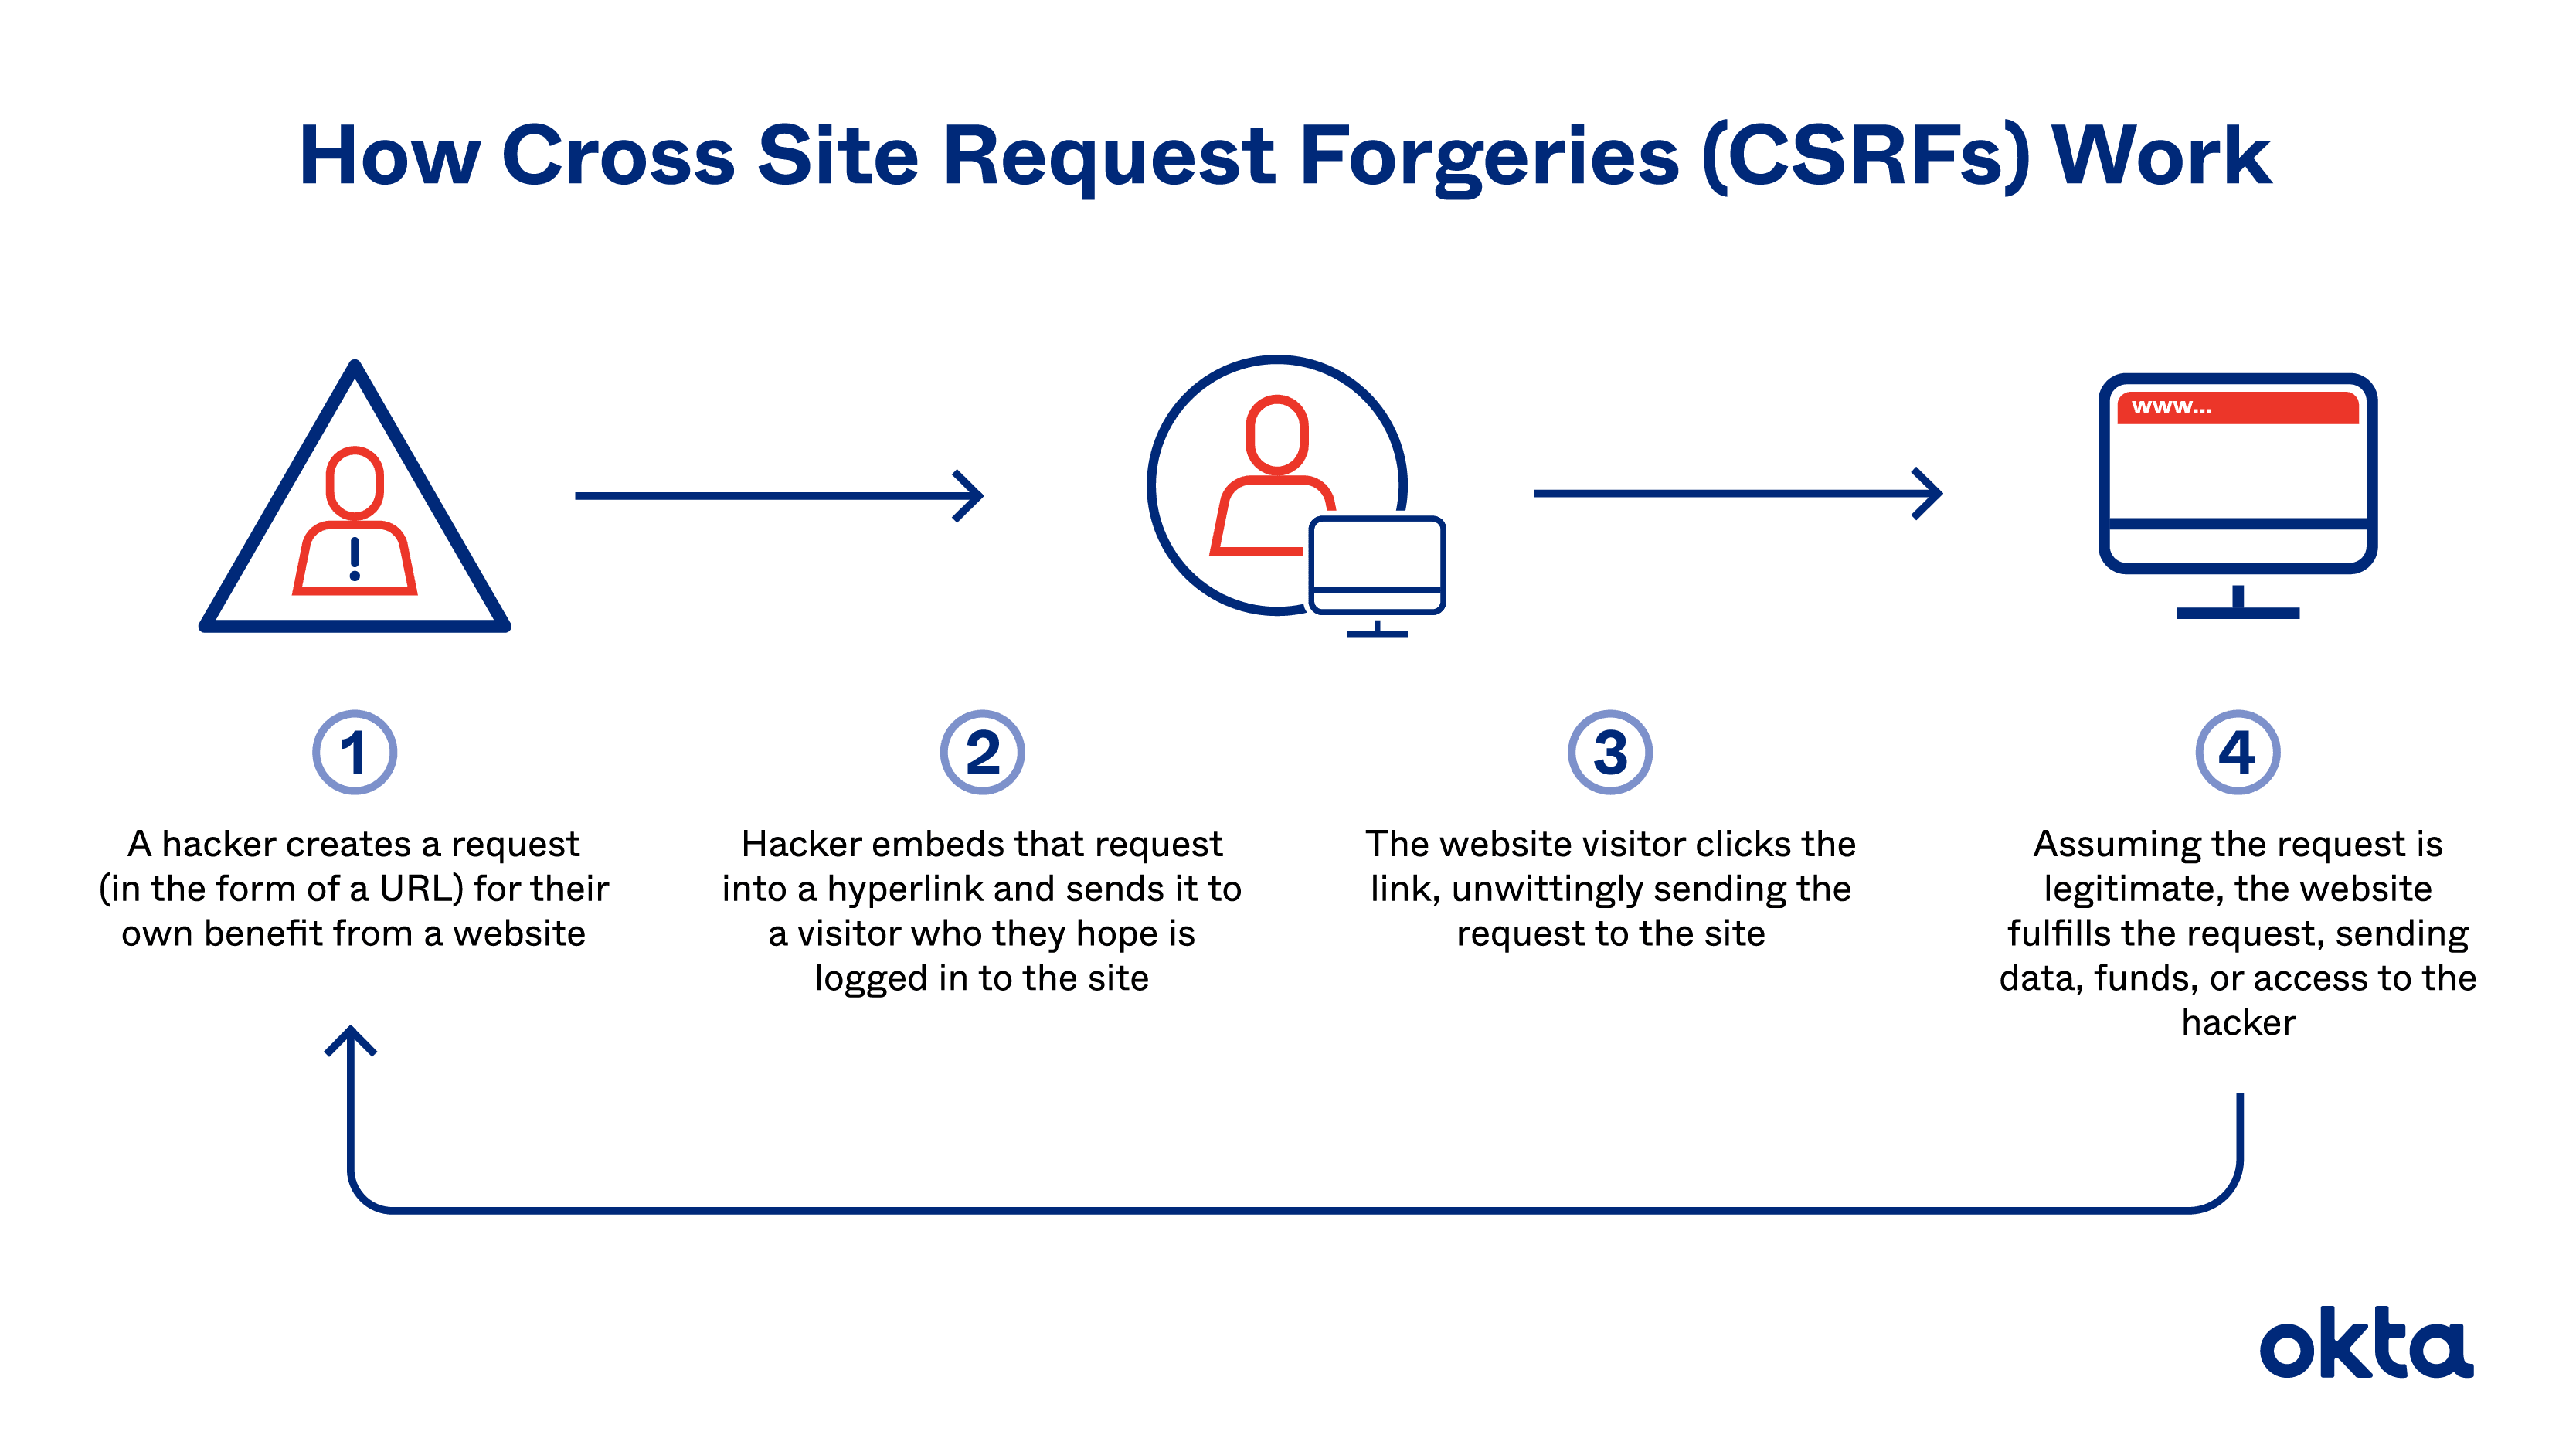 An illustration of how Cross Site Request Forgeries (CSRFs) work. 